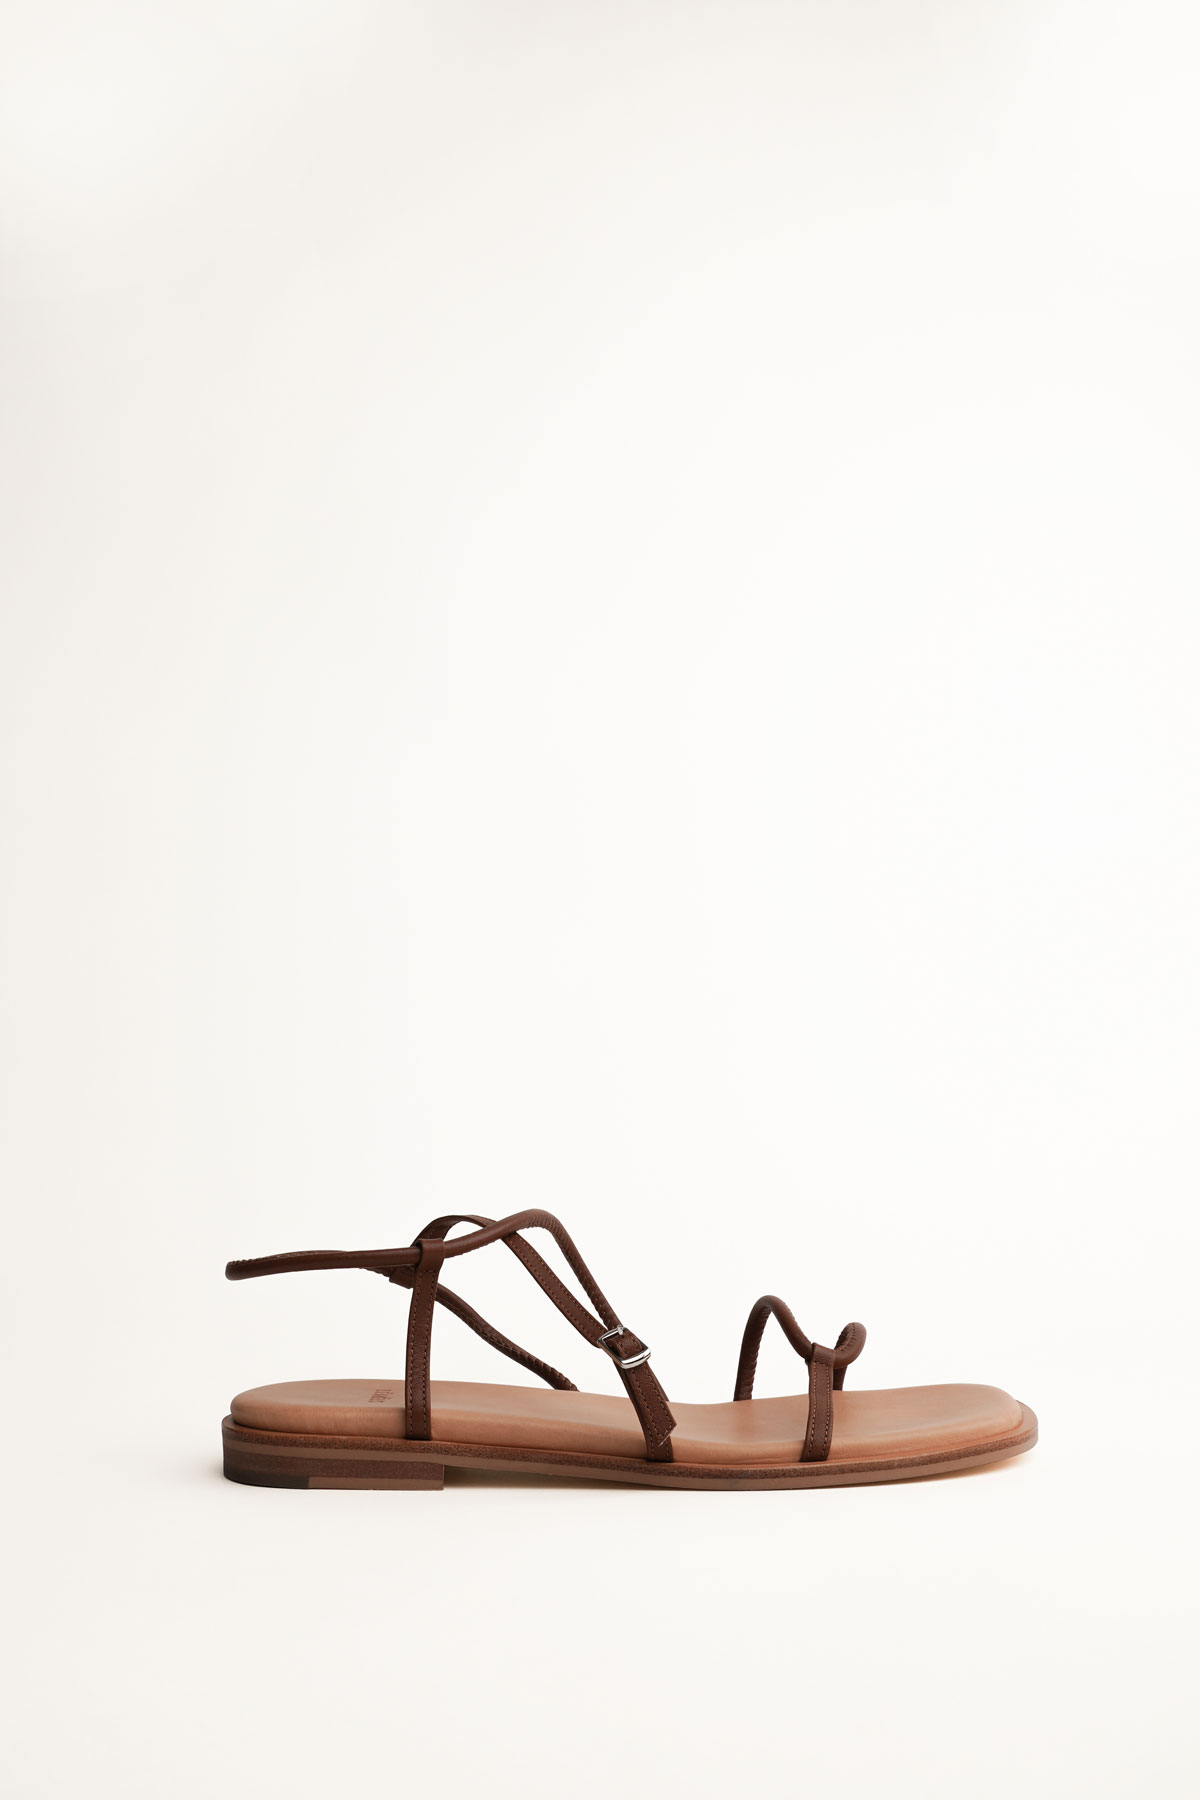 00_ROPE STRAP-LEATHER SANDAL WALNUT BROWN